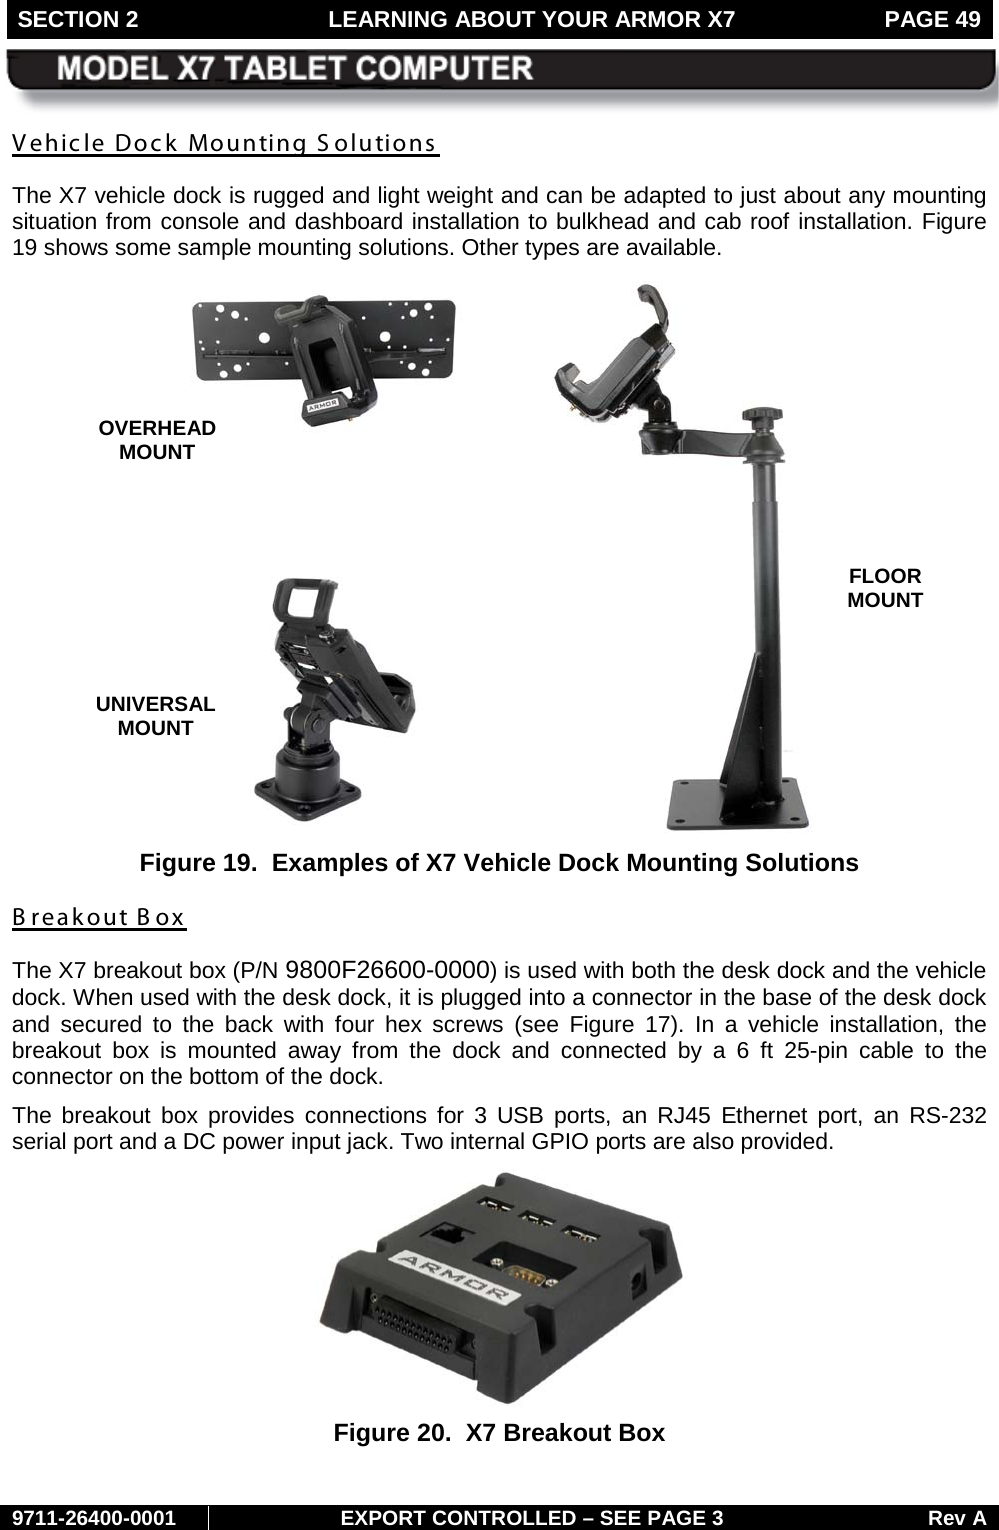 SECTION 2 LEARNING ABOUT YOUR ARMOR X7  PAGE 49        9711-26400-0001 EXPORT CONTROLLED – SEE PAGE 3 Rev A Vehicle Dock Mounting Solutions  The X7 vehicle dock is rugged and light weight and can be adapted to just about any mounting situation from console and dashboard installation to bulkhead and cab roof installation. Figure 19 shows some sample mounting solutions. Other types are available.  Figure 19.  Examples of X7 Vehicle Dock Mounting Solutions B reakout Box The X7 breakout box (P/N 9800F26600-0000) is used with both the desk dock and the vehicle dock. When used with the desk dock, it is plugged into a connector in the base of the desk dock and secured to the back with four hex screws (see  Figure  17). In a vehicle installation, the breakout box is mounted away from the dock and  connected by a  6 ft 25-pin  cable to the connector on the bottom of the dock.  The breakout box provides connections for 3 USB ports, an RJ45  Ethernet port, an RS-232 serial port and a DC power input jack. Two internal GPIO ports are also provided.  Figure 20.  X7 Breakout Box  OVERHEAD  MOUNT FLOOR MOUNT UNIVERSAL  MOUNT 